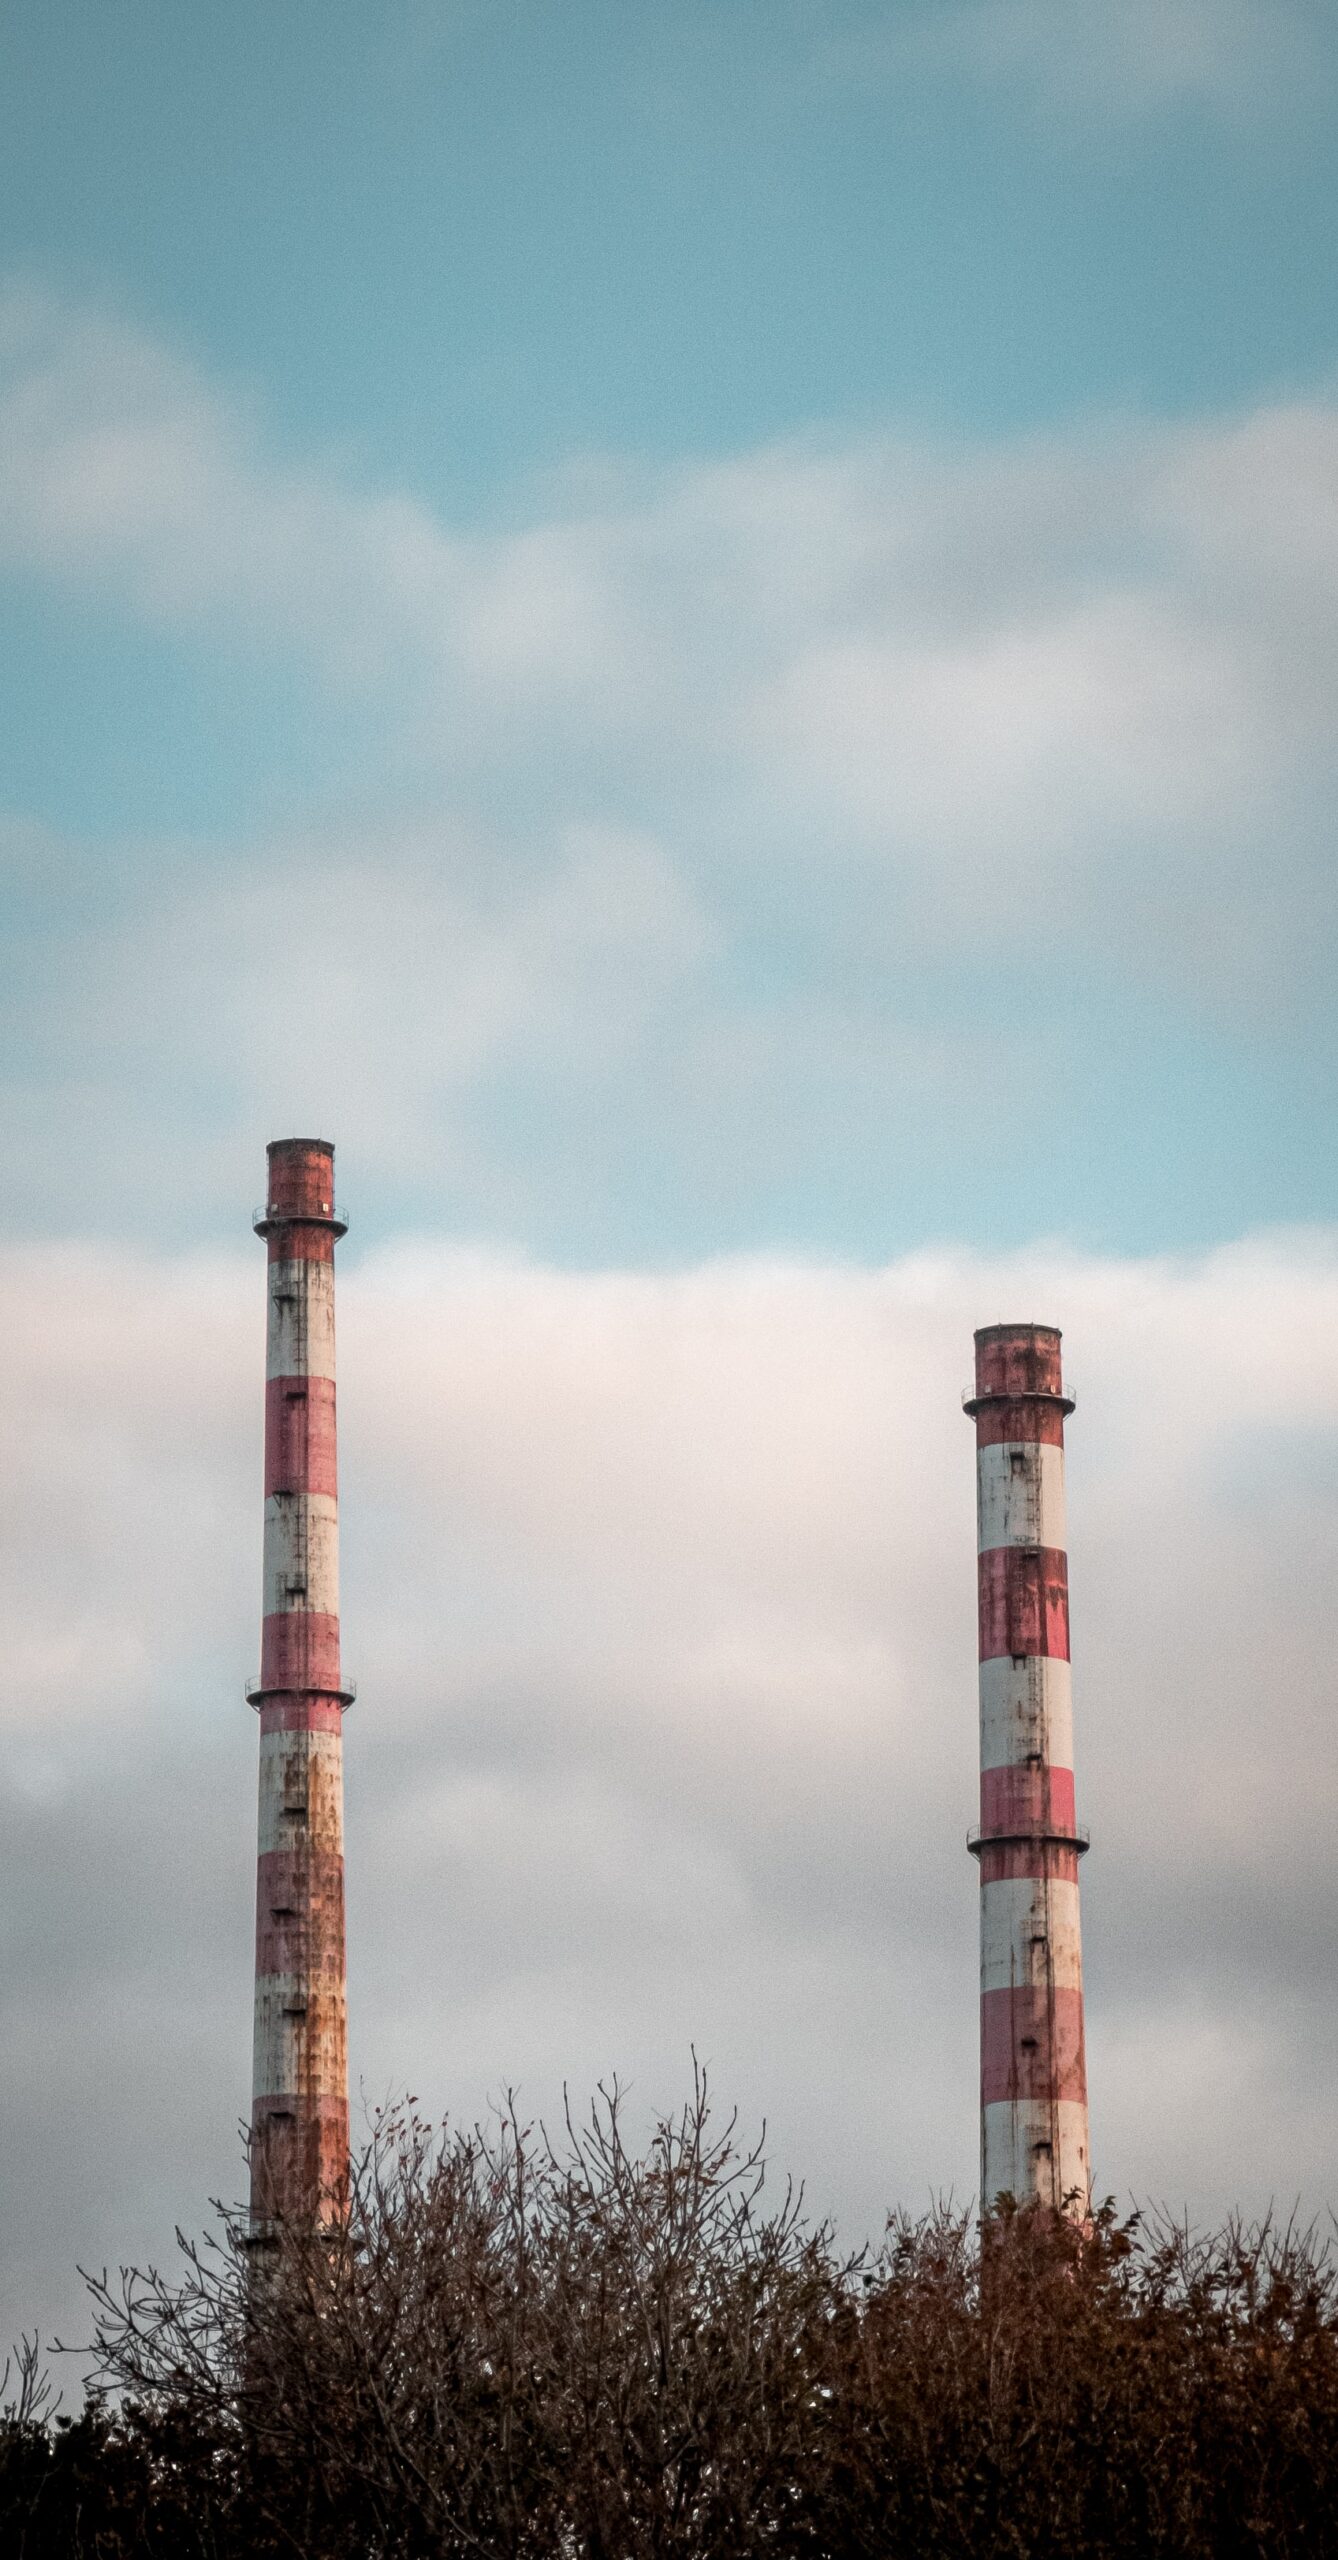 https://unsplash.com/photos/photo-of-two-white-and-red-towers-ni-CFSlJFRQ